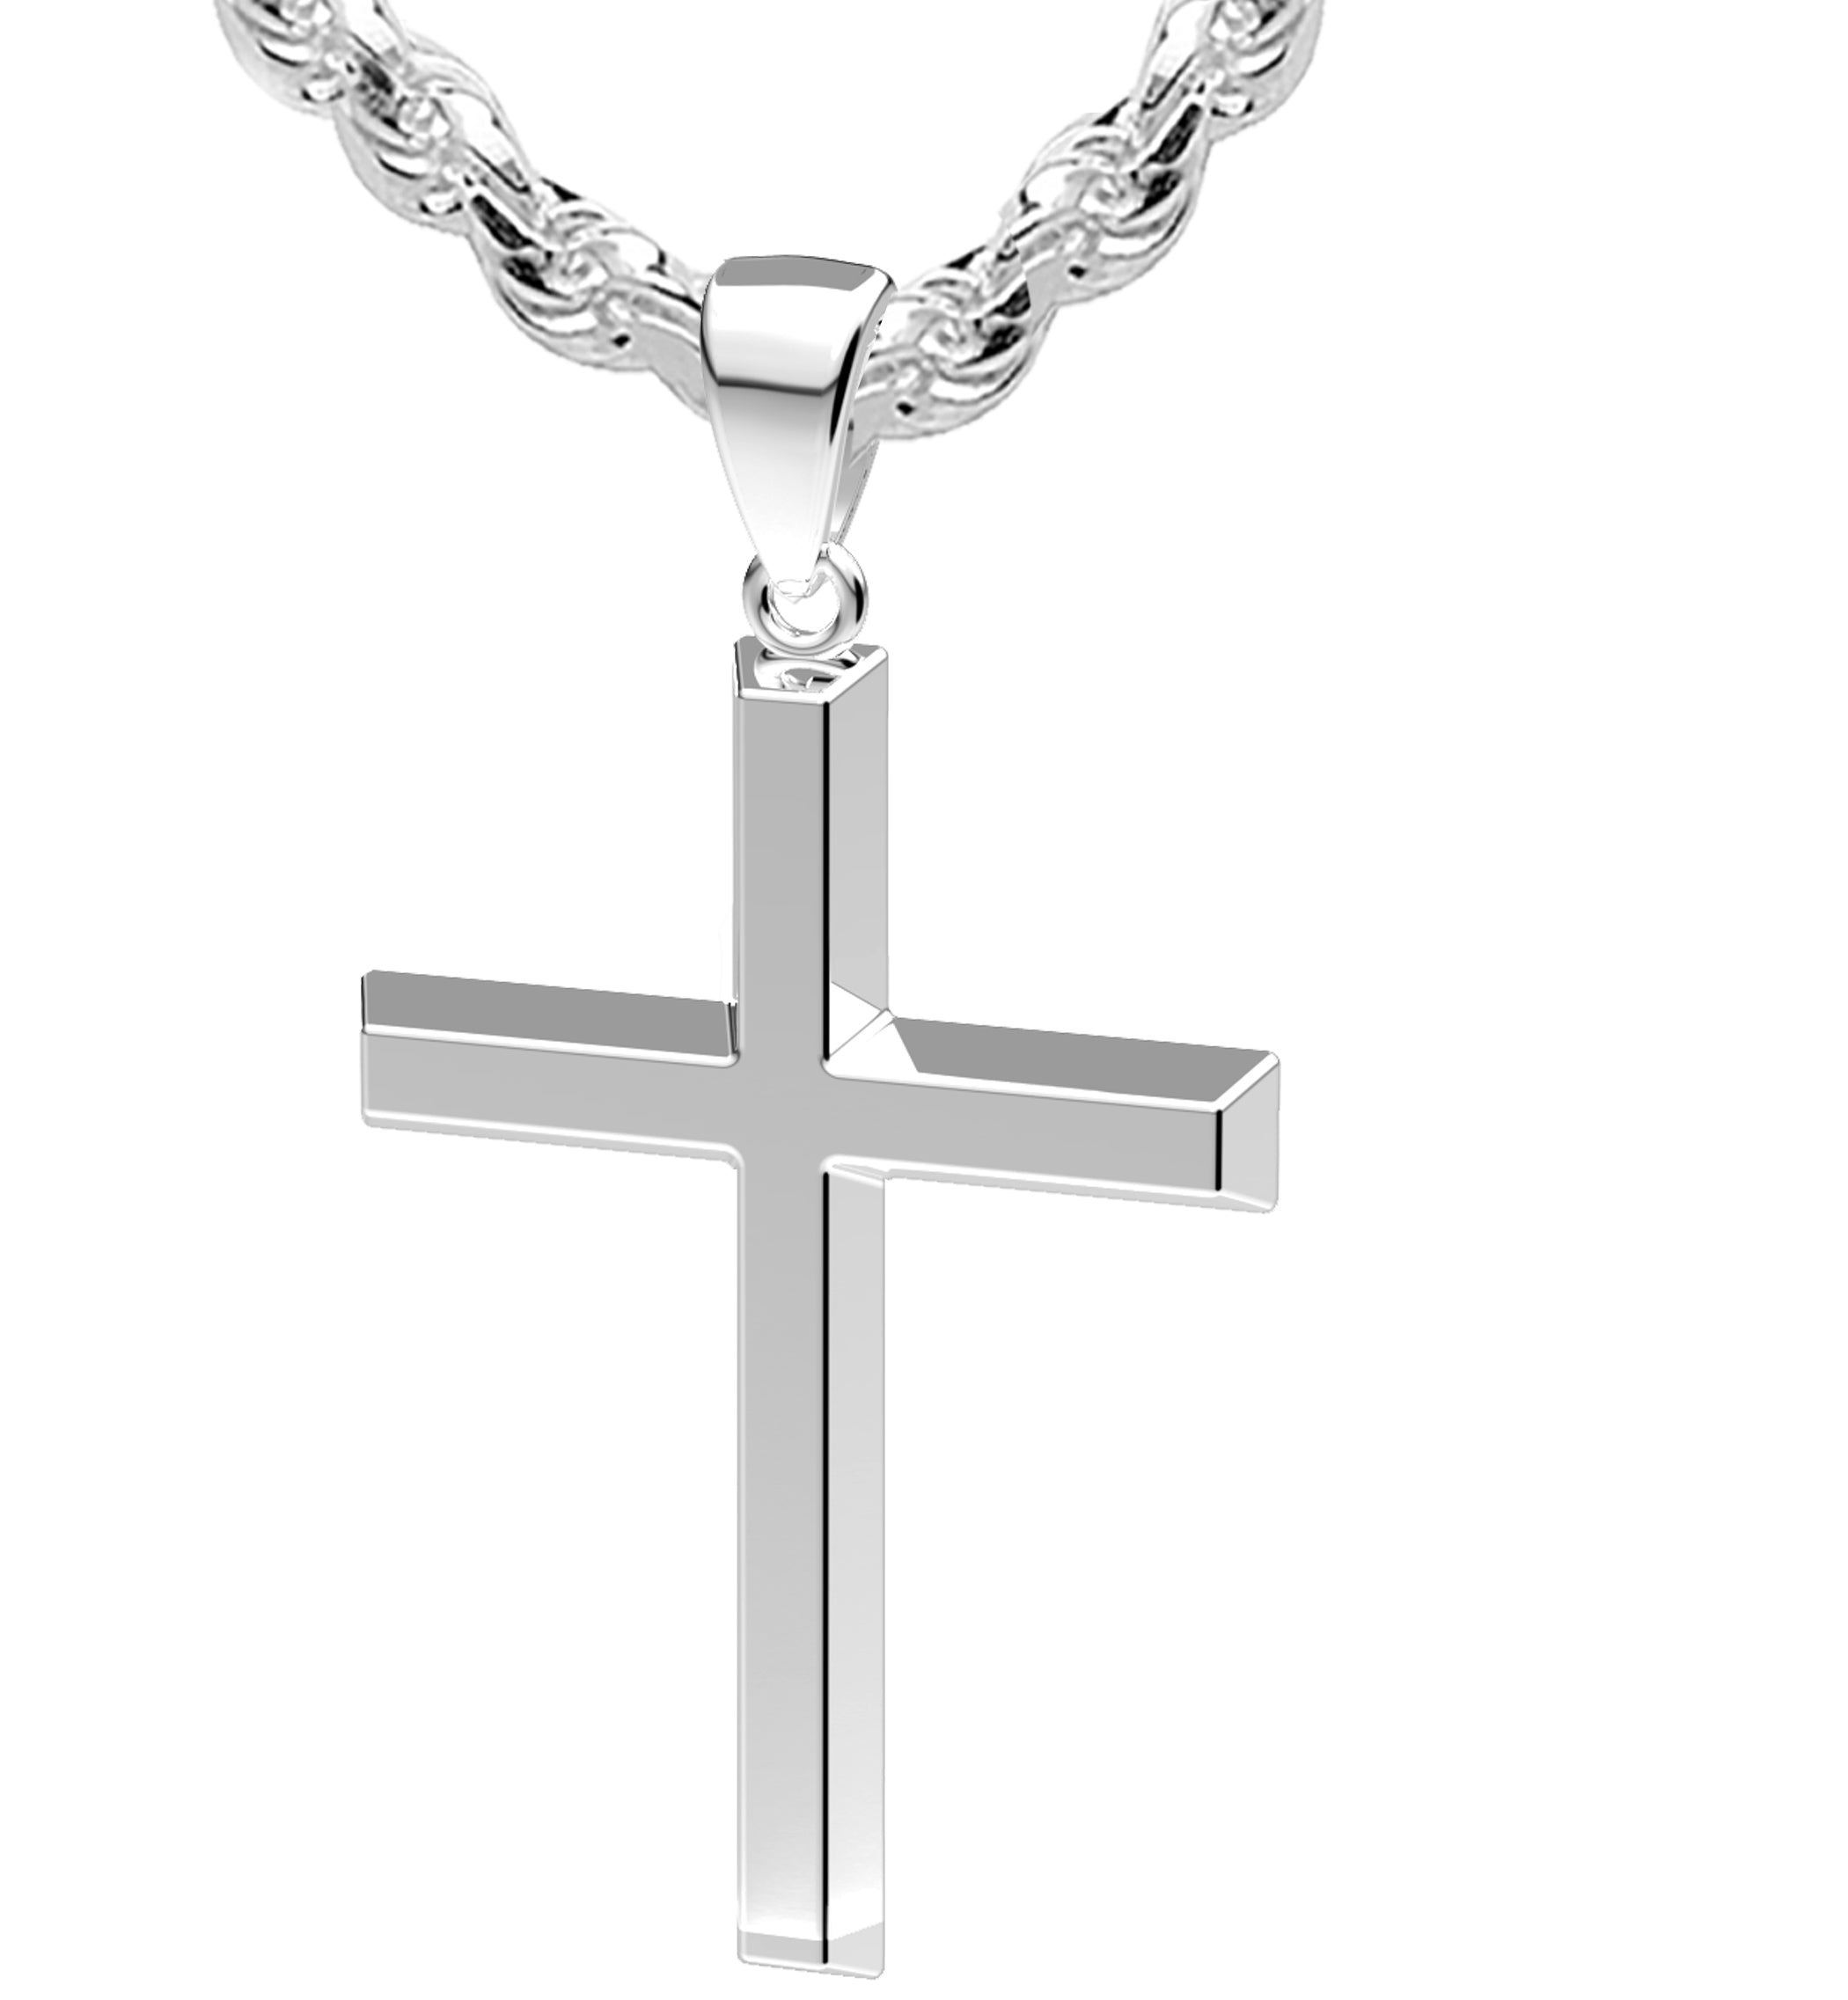 Buy Waterproof Silver Cross Necklace for Men / 316L Stainless Steel, Short  or Long Cuban Link Style Chain for Guys / Jewelry Gifts for Men, Guys  Online in India - Etsy